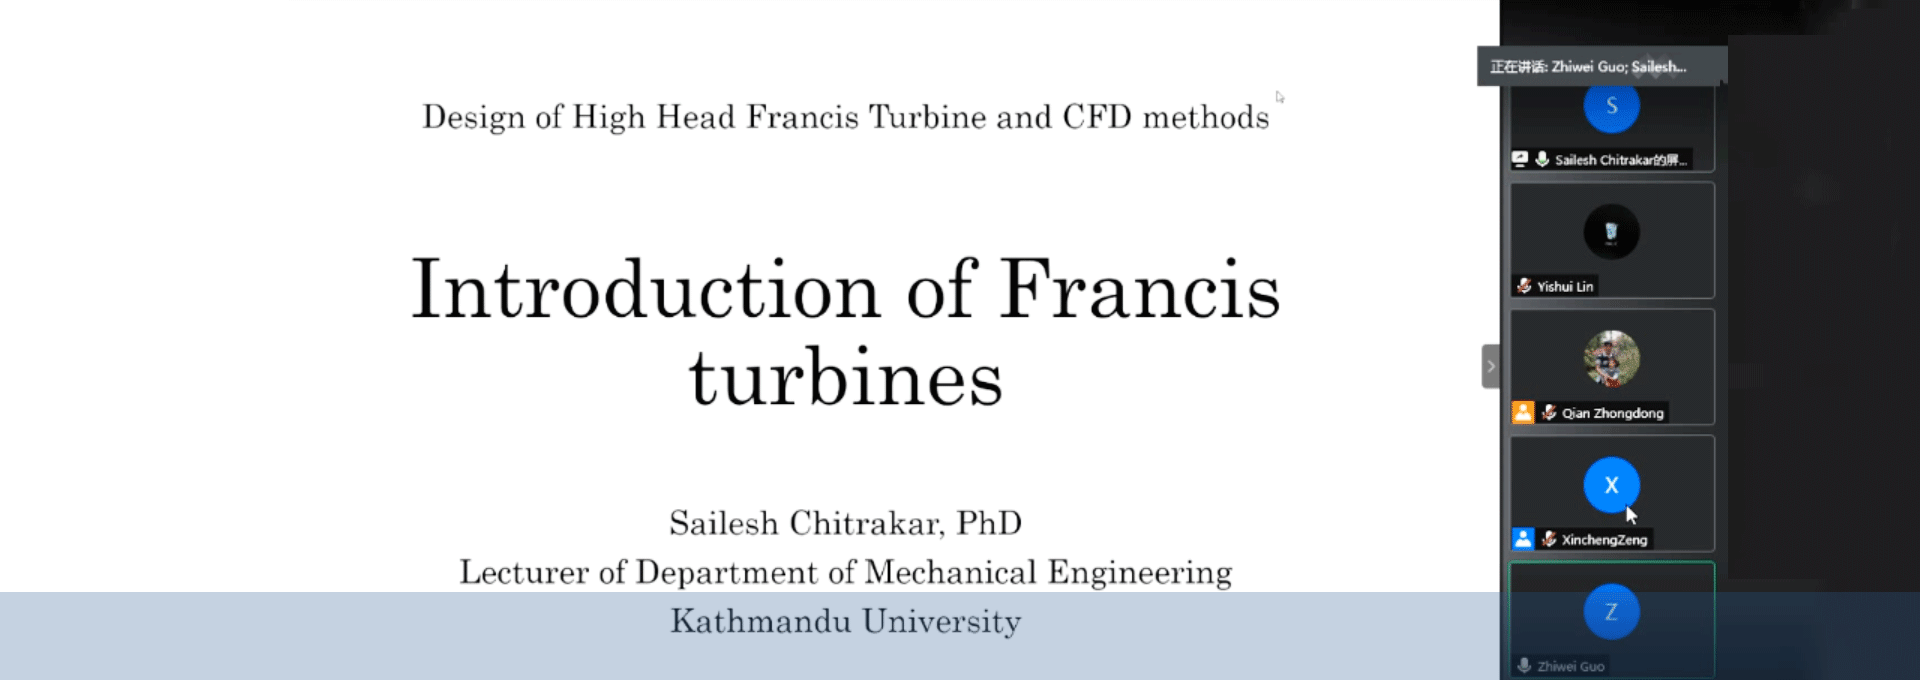 Course: Design of High Head Francis Turbine and CFD methods (1)